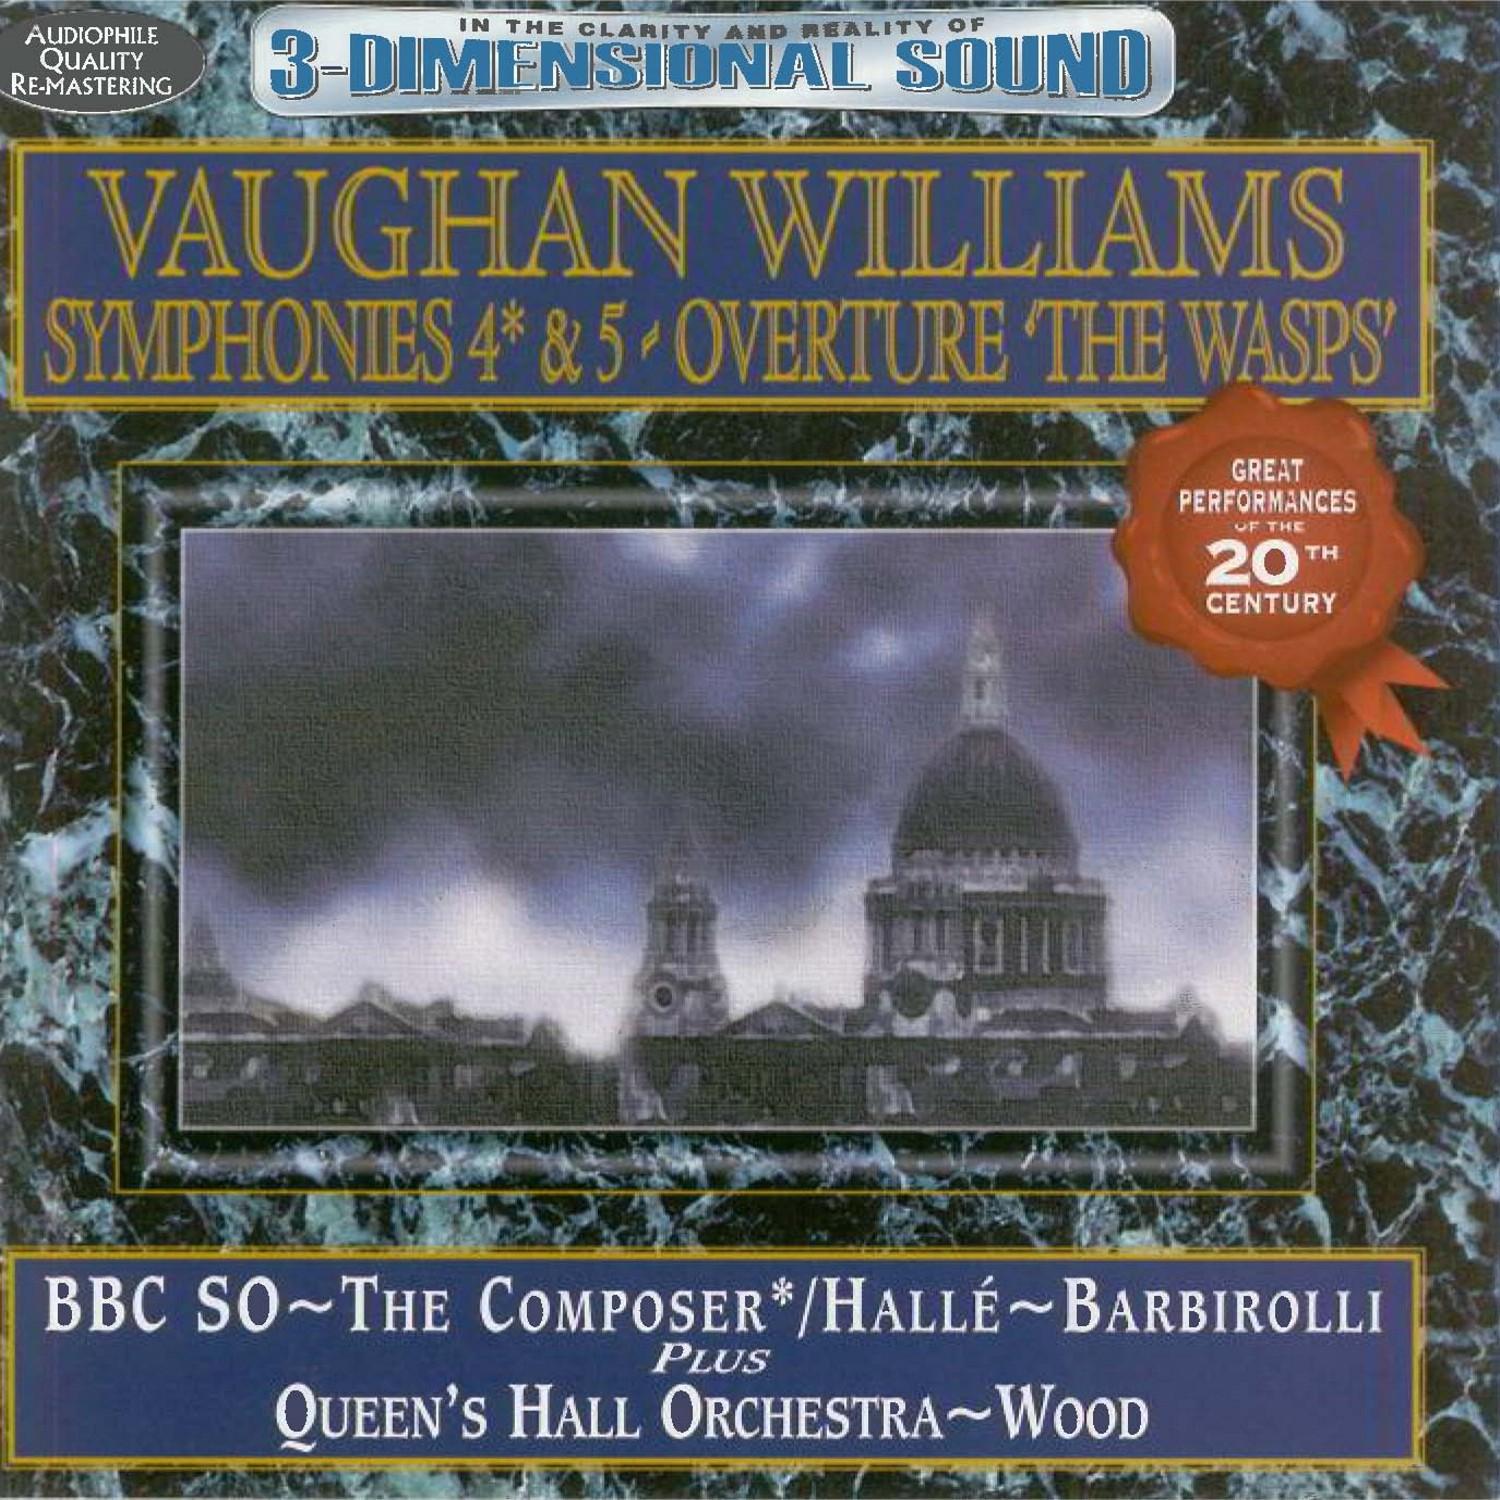 Vaughan Williams Symphonies 4 In F Minor & 5 In D Minor - Overture "The Wasps" (Digitally Remastered)